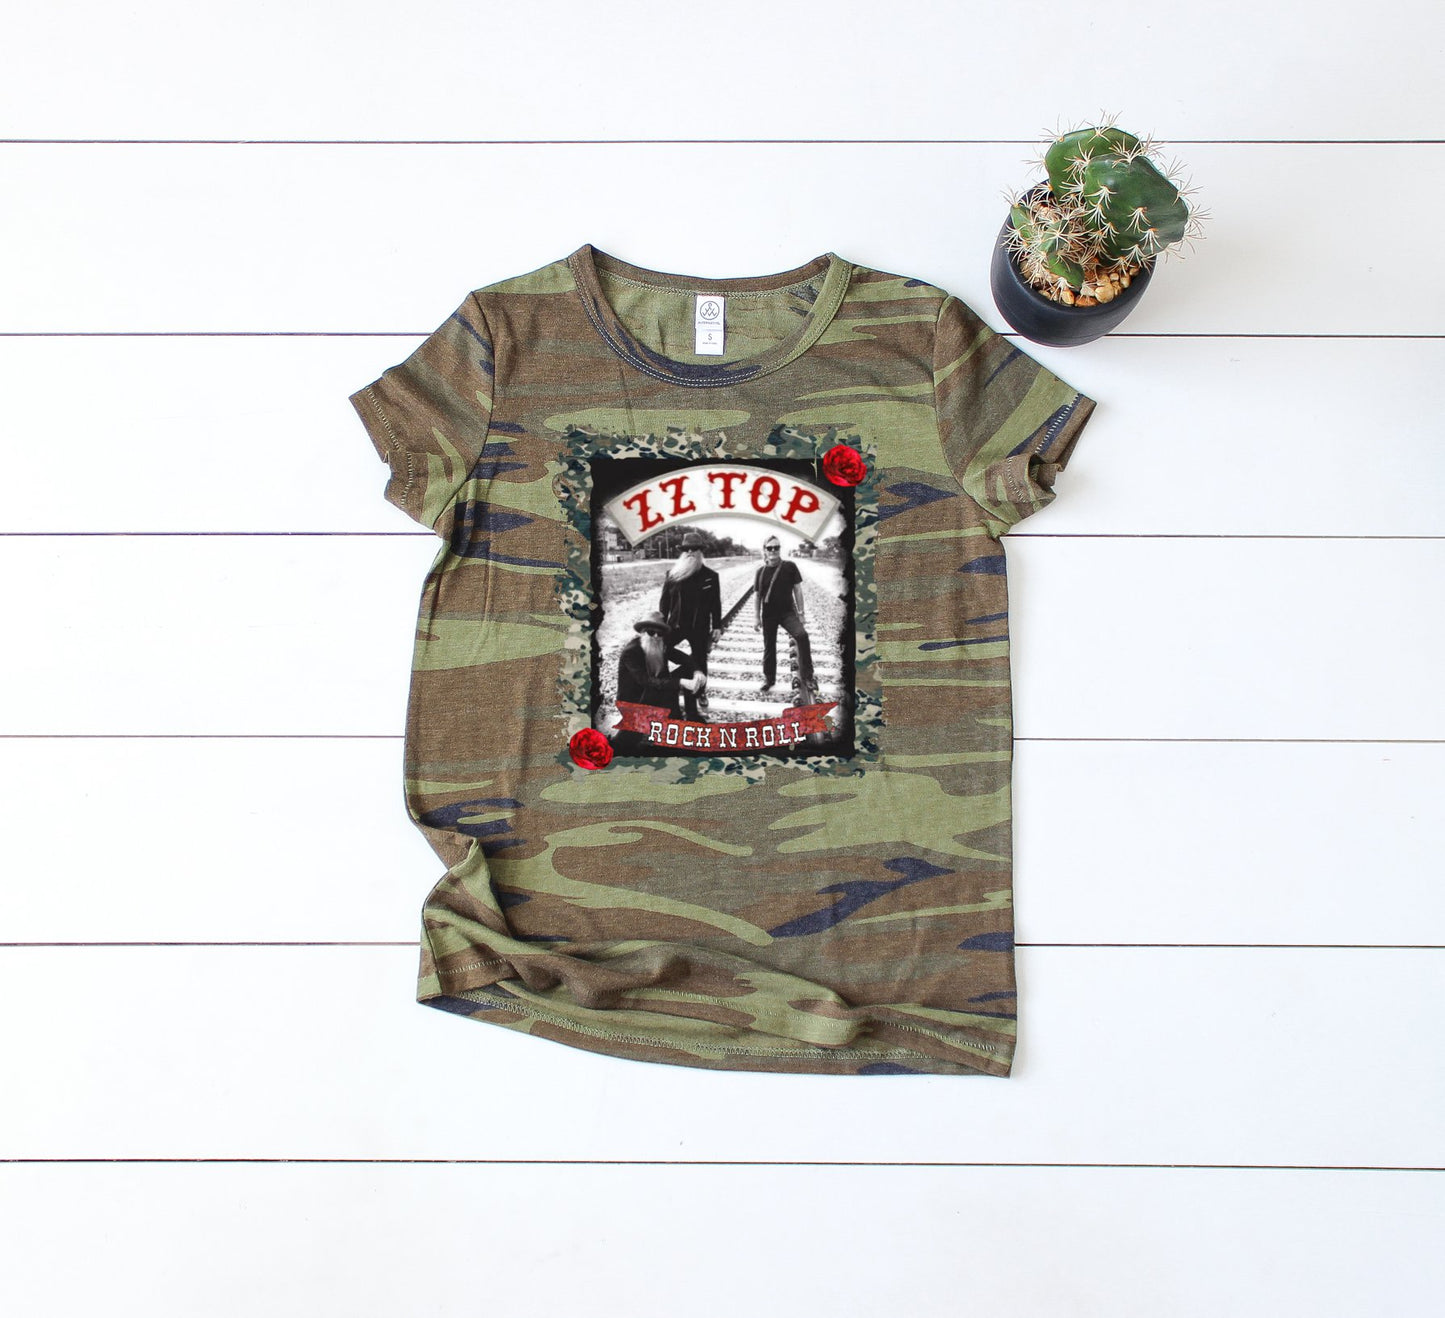 ZZ Top Rock n' Roll SS Camo Boutique Tee - Custom Printed Preorder Tees